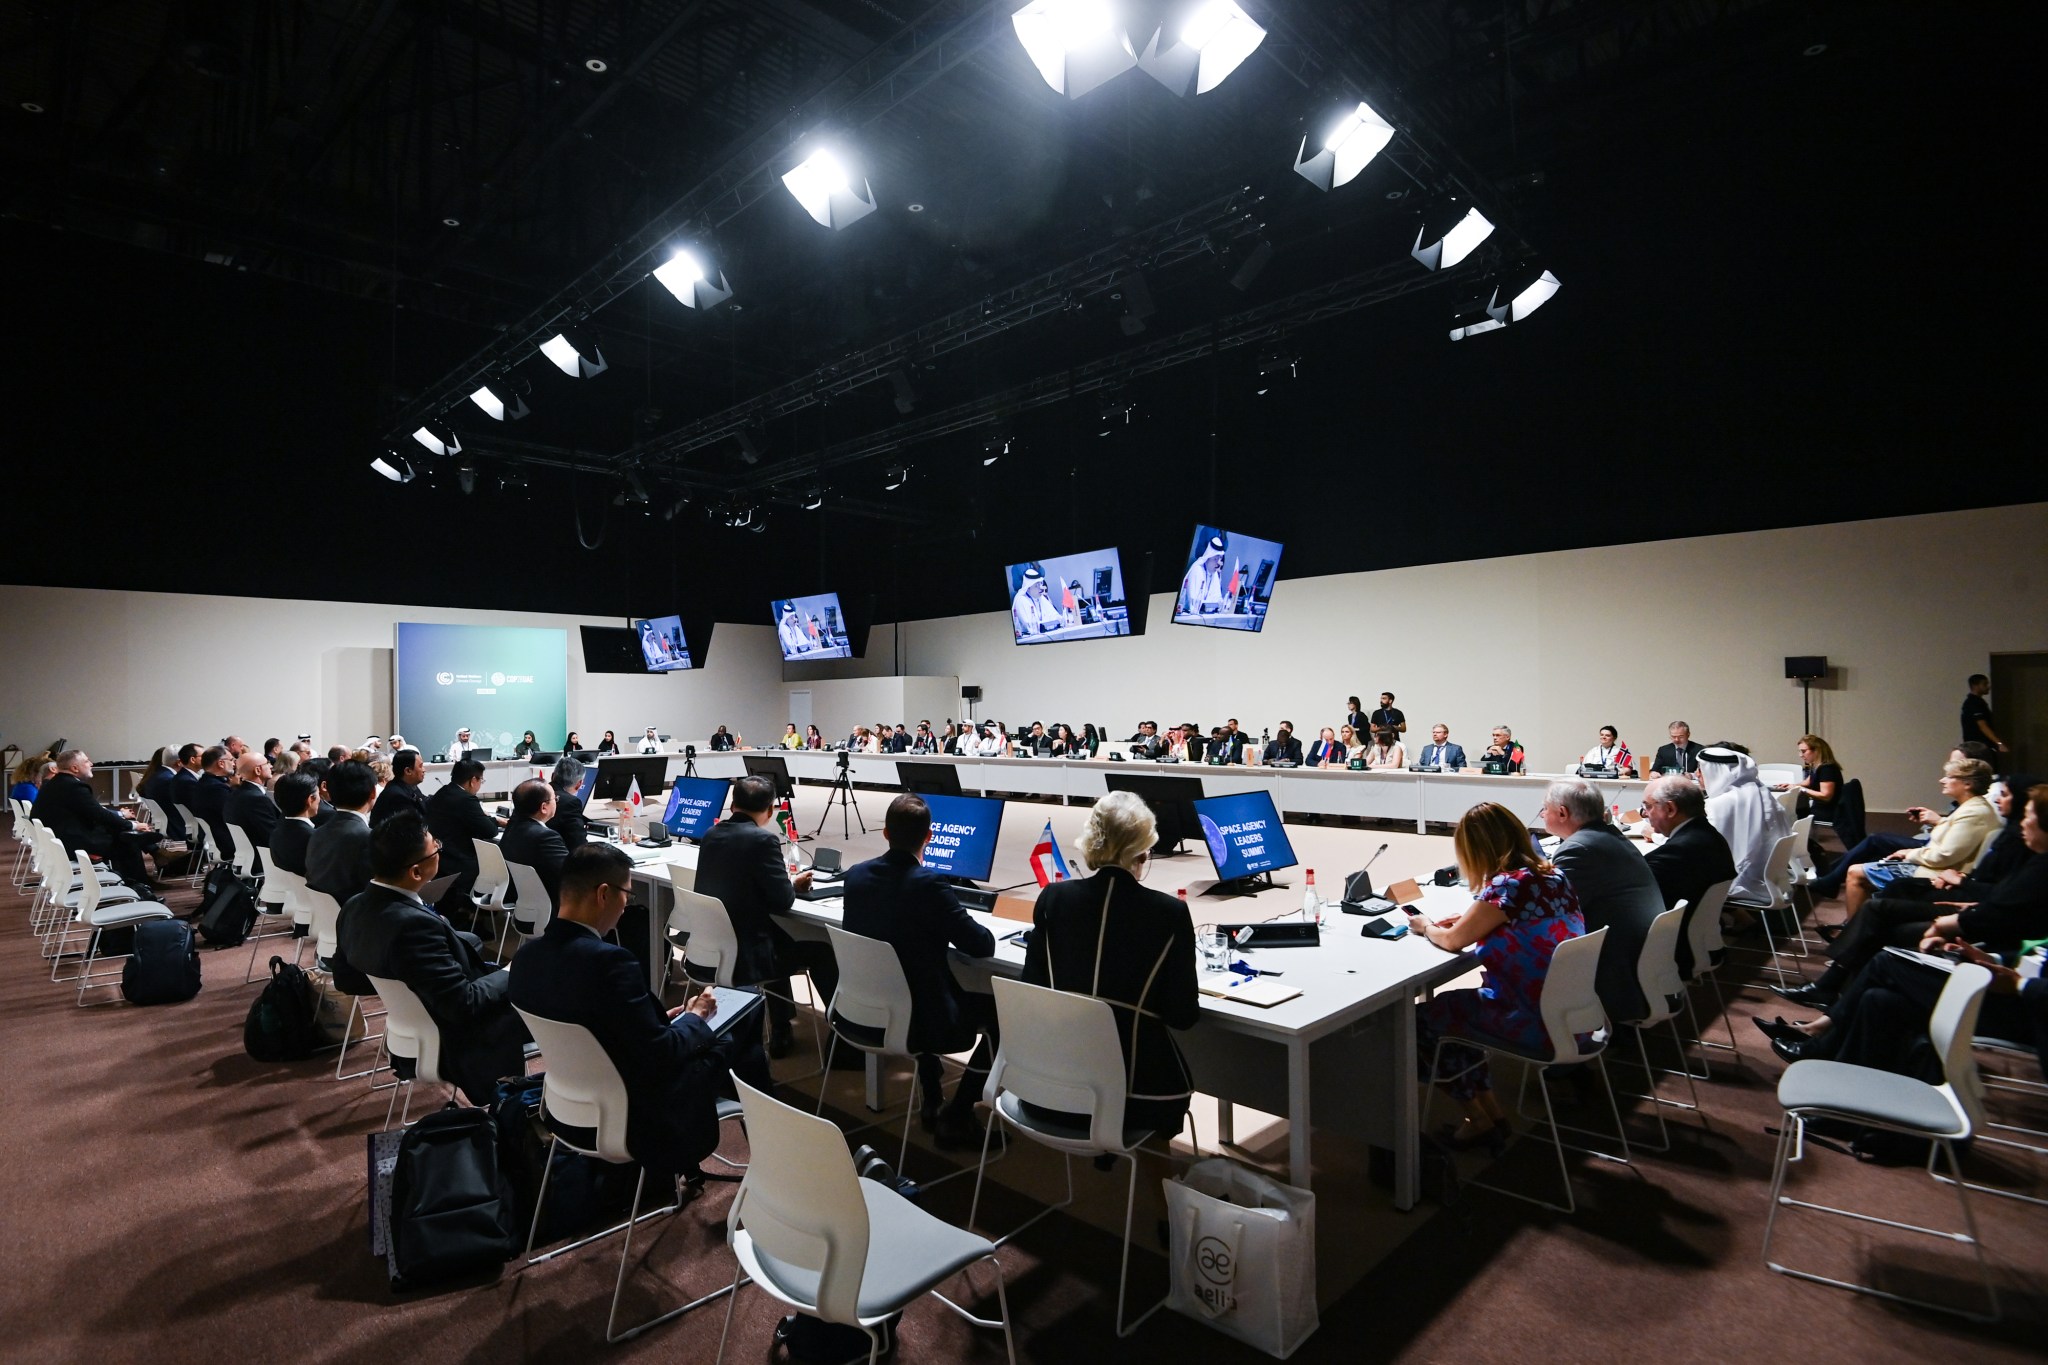 Leaders from two dozen space agencies sit in rows of chairs around a large open rectangular table illuminated under a truss of white lights.